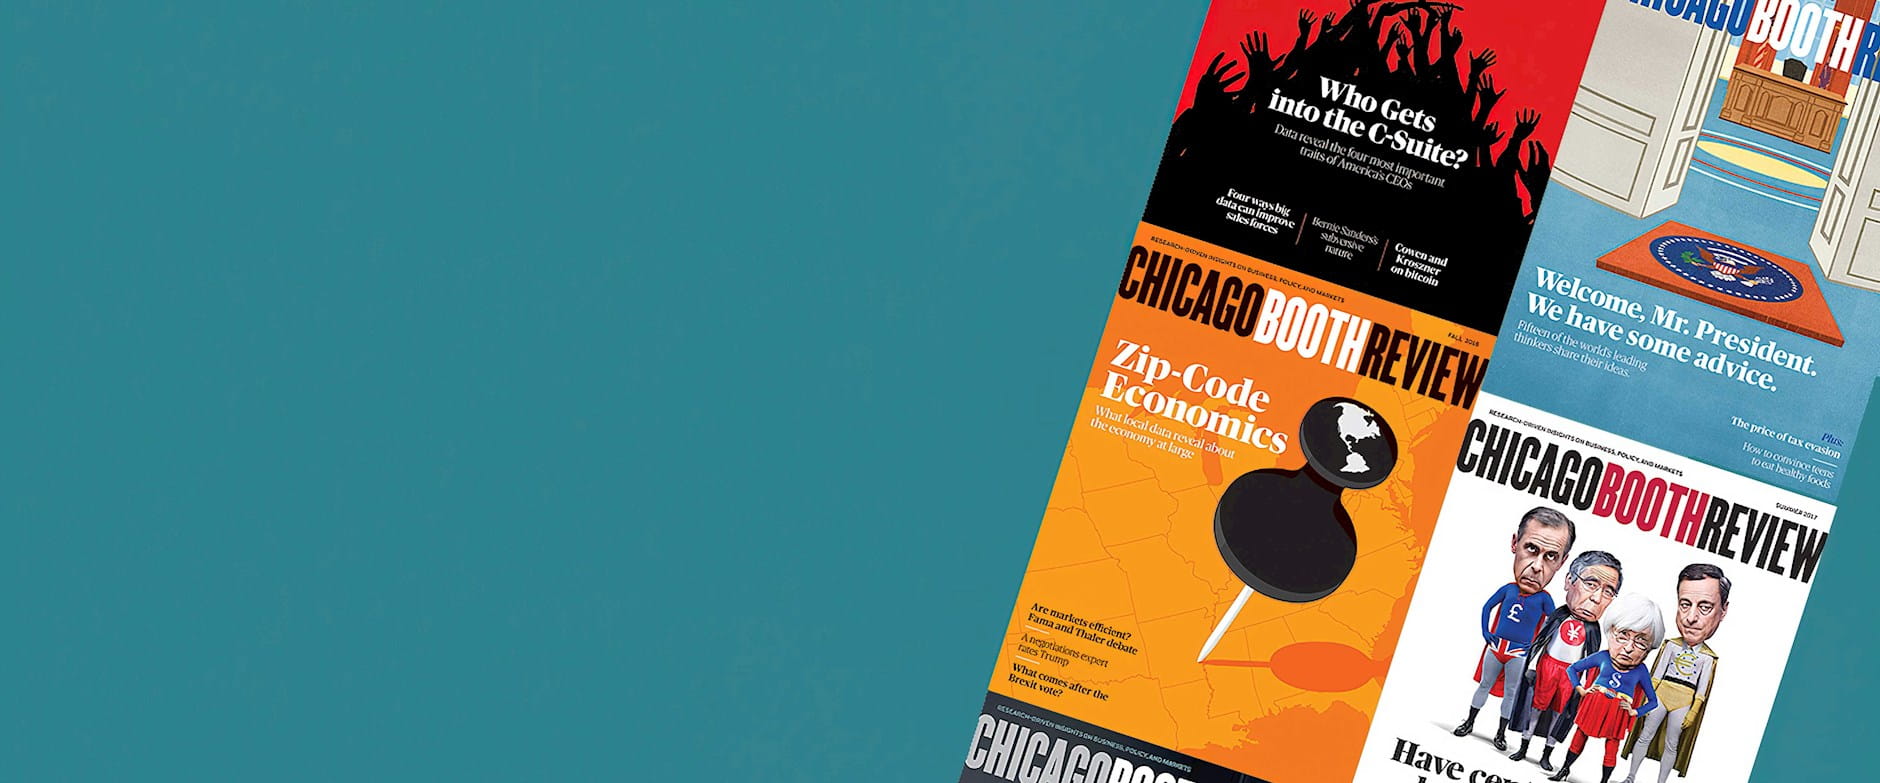 Chicago Booth Review magazine covers